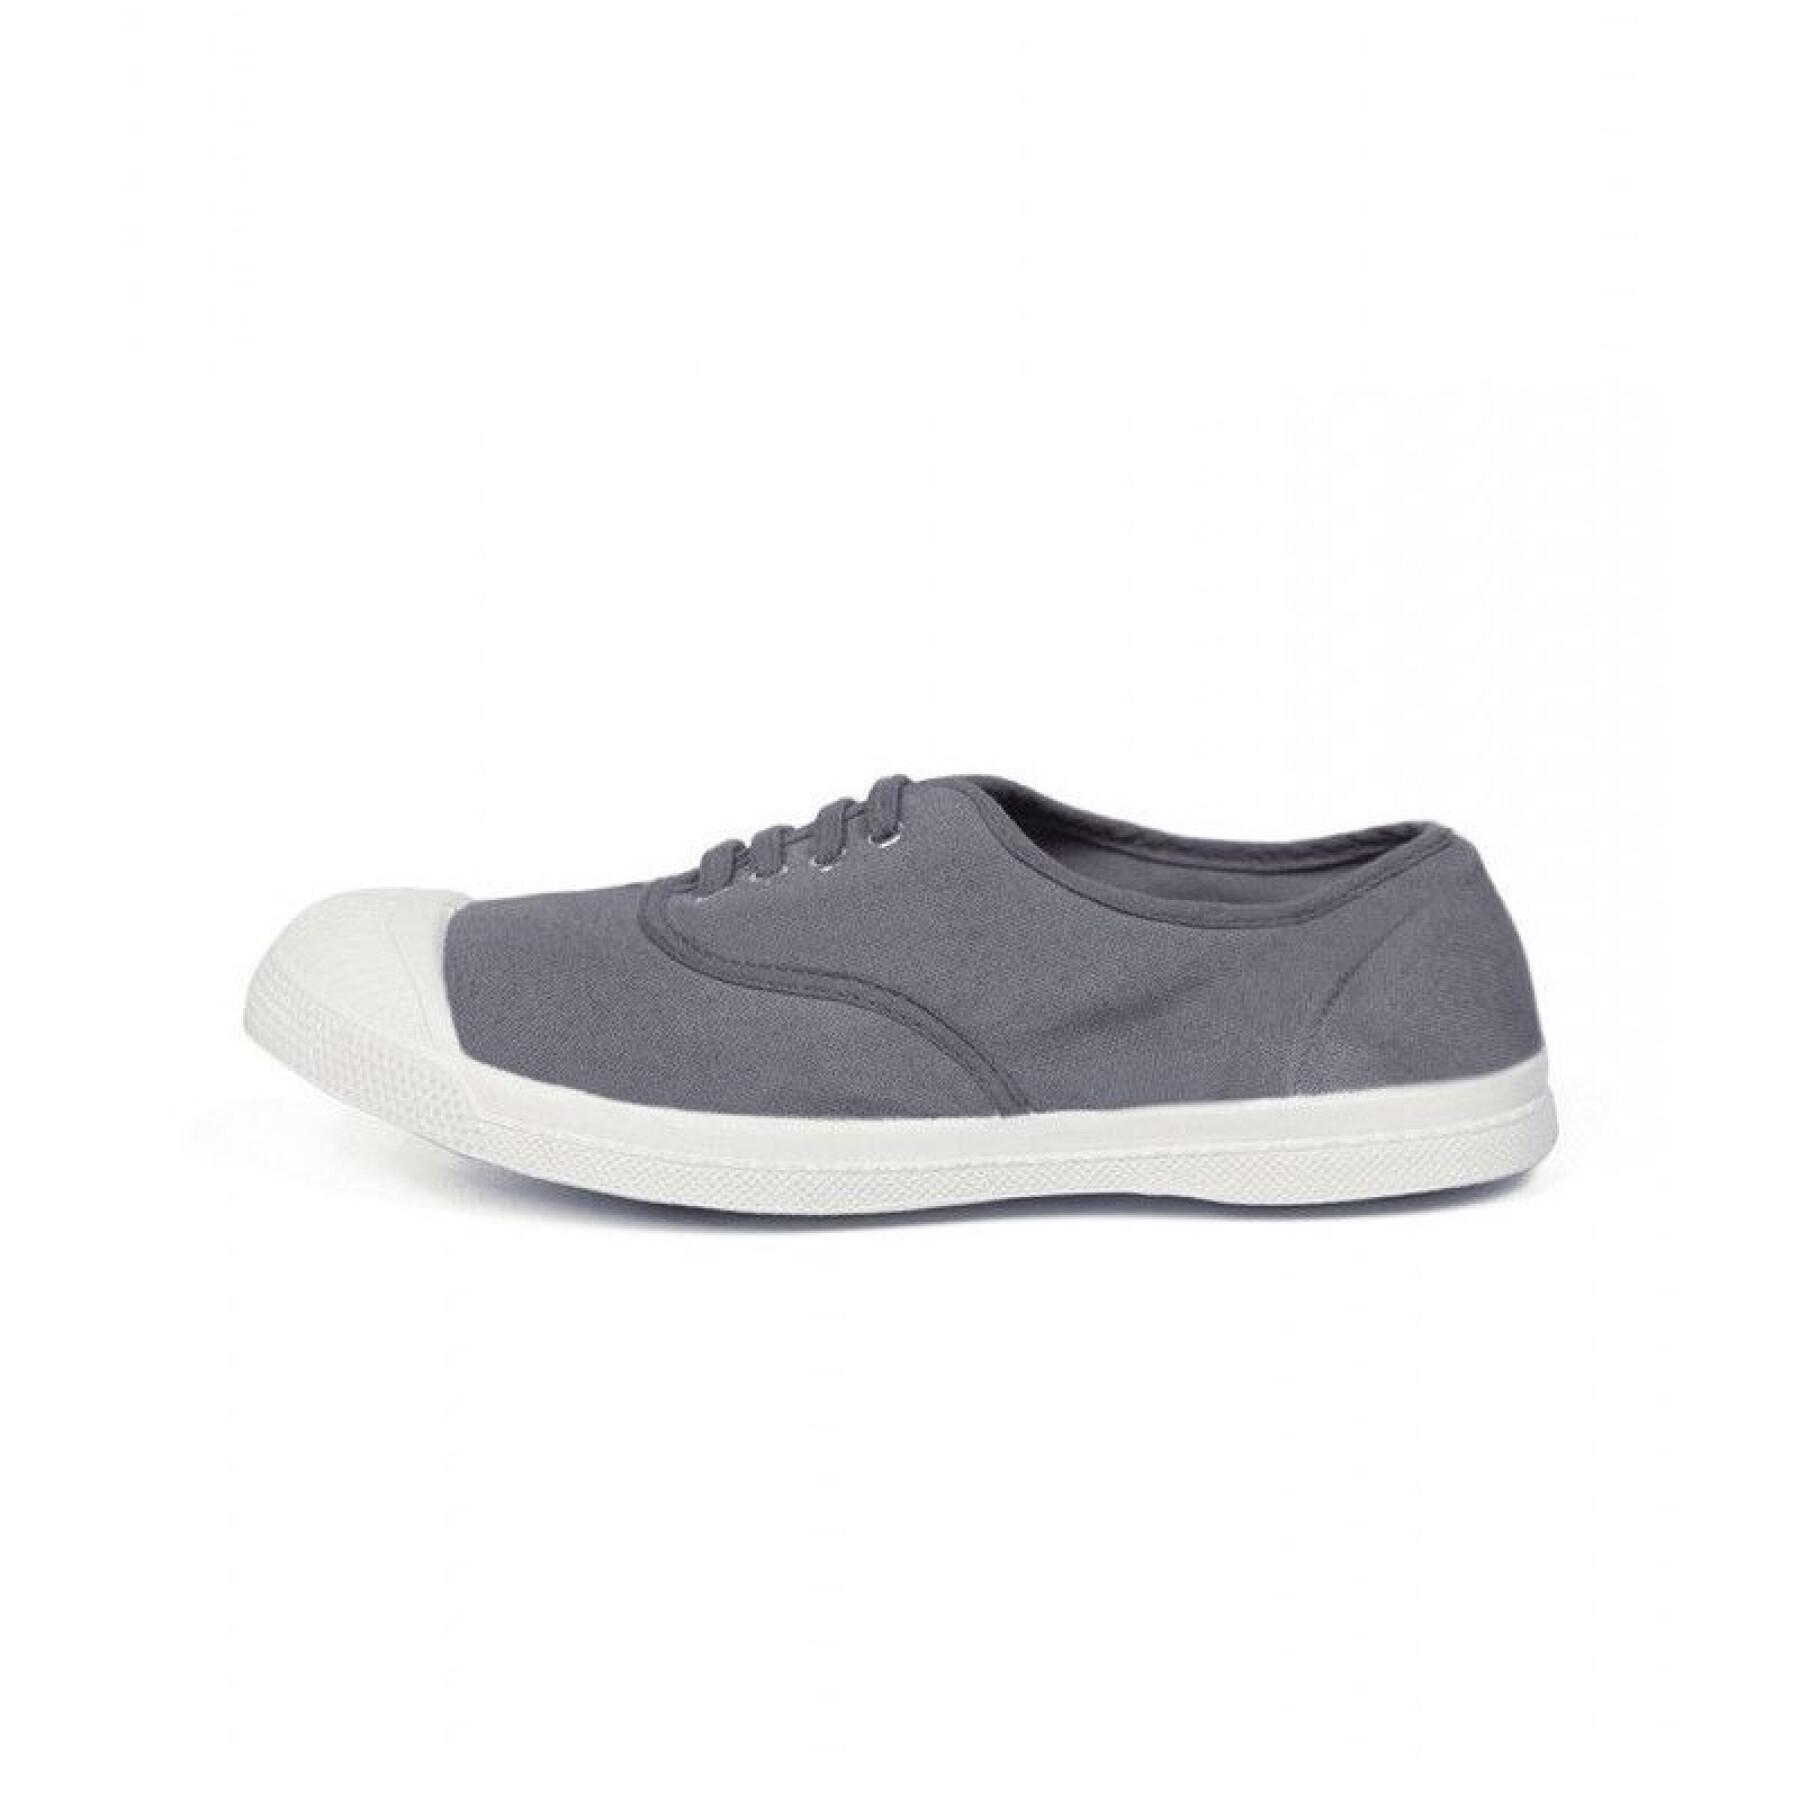 Women's lace-up sneakers Bensimon